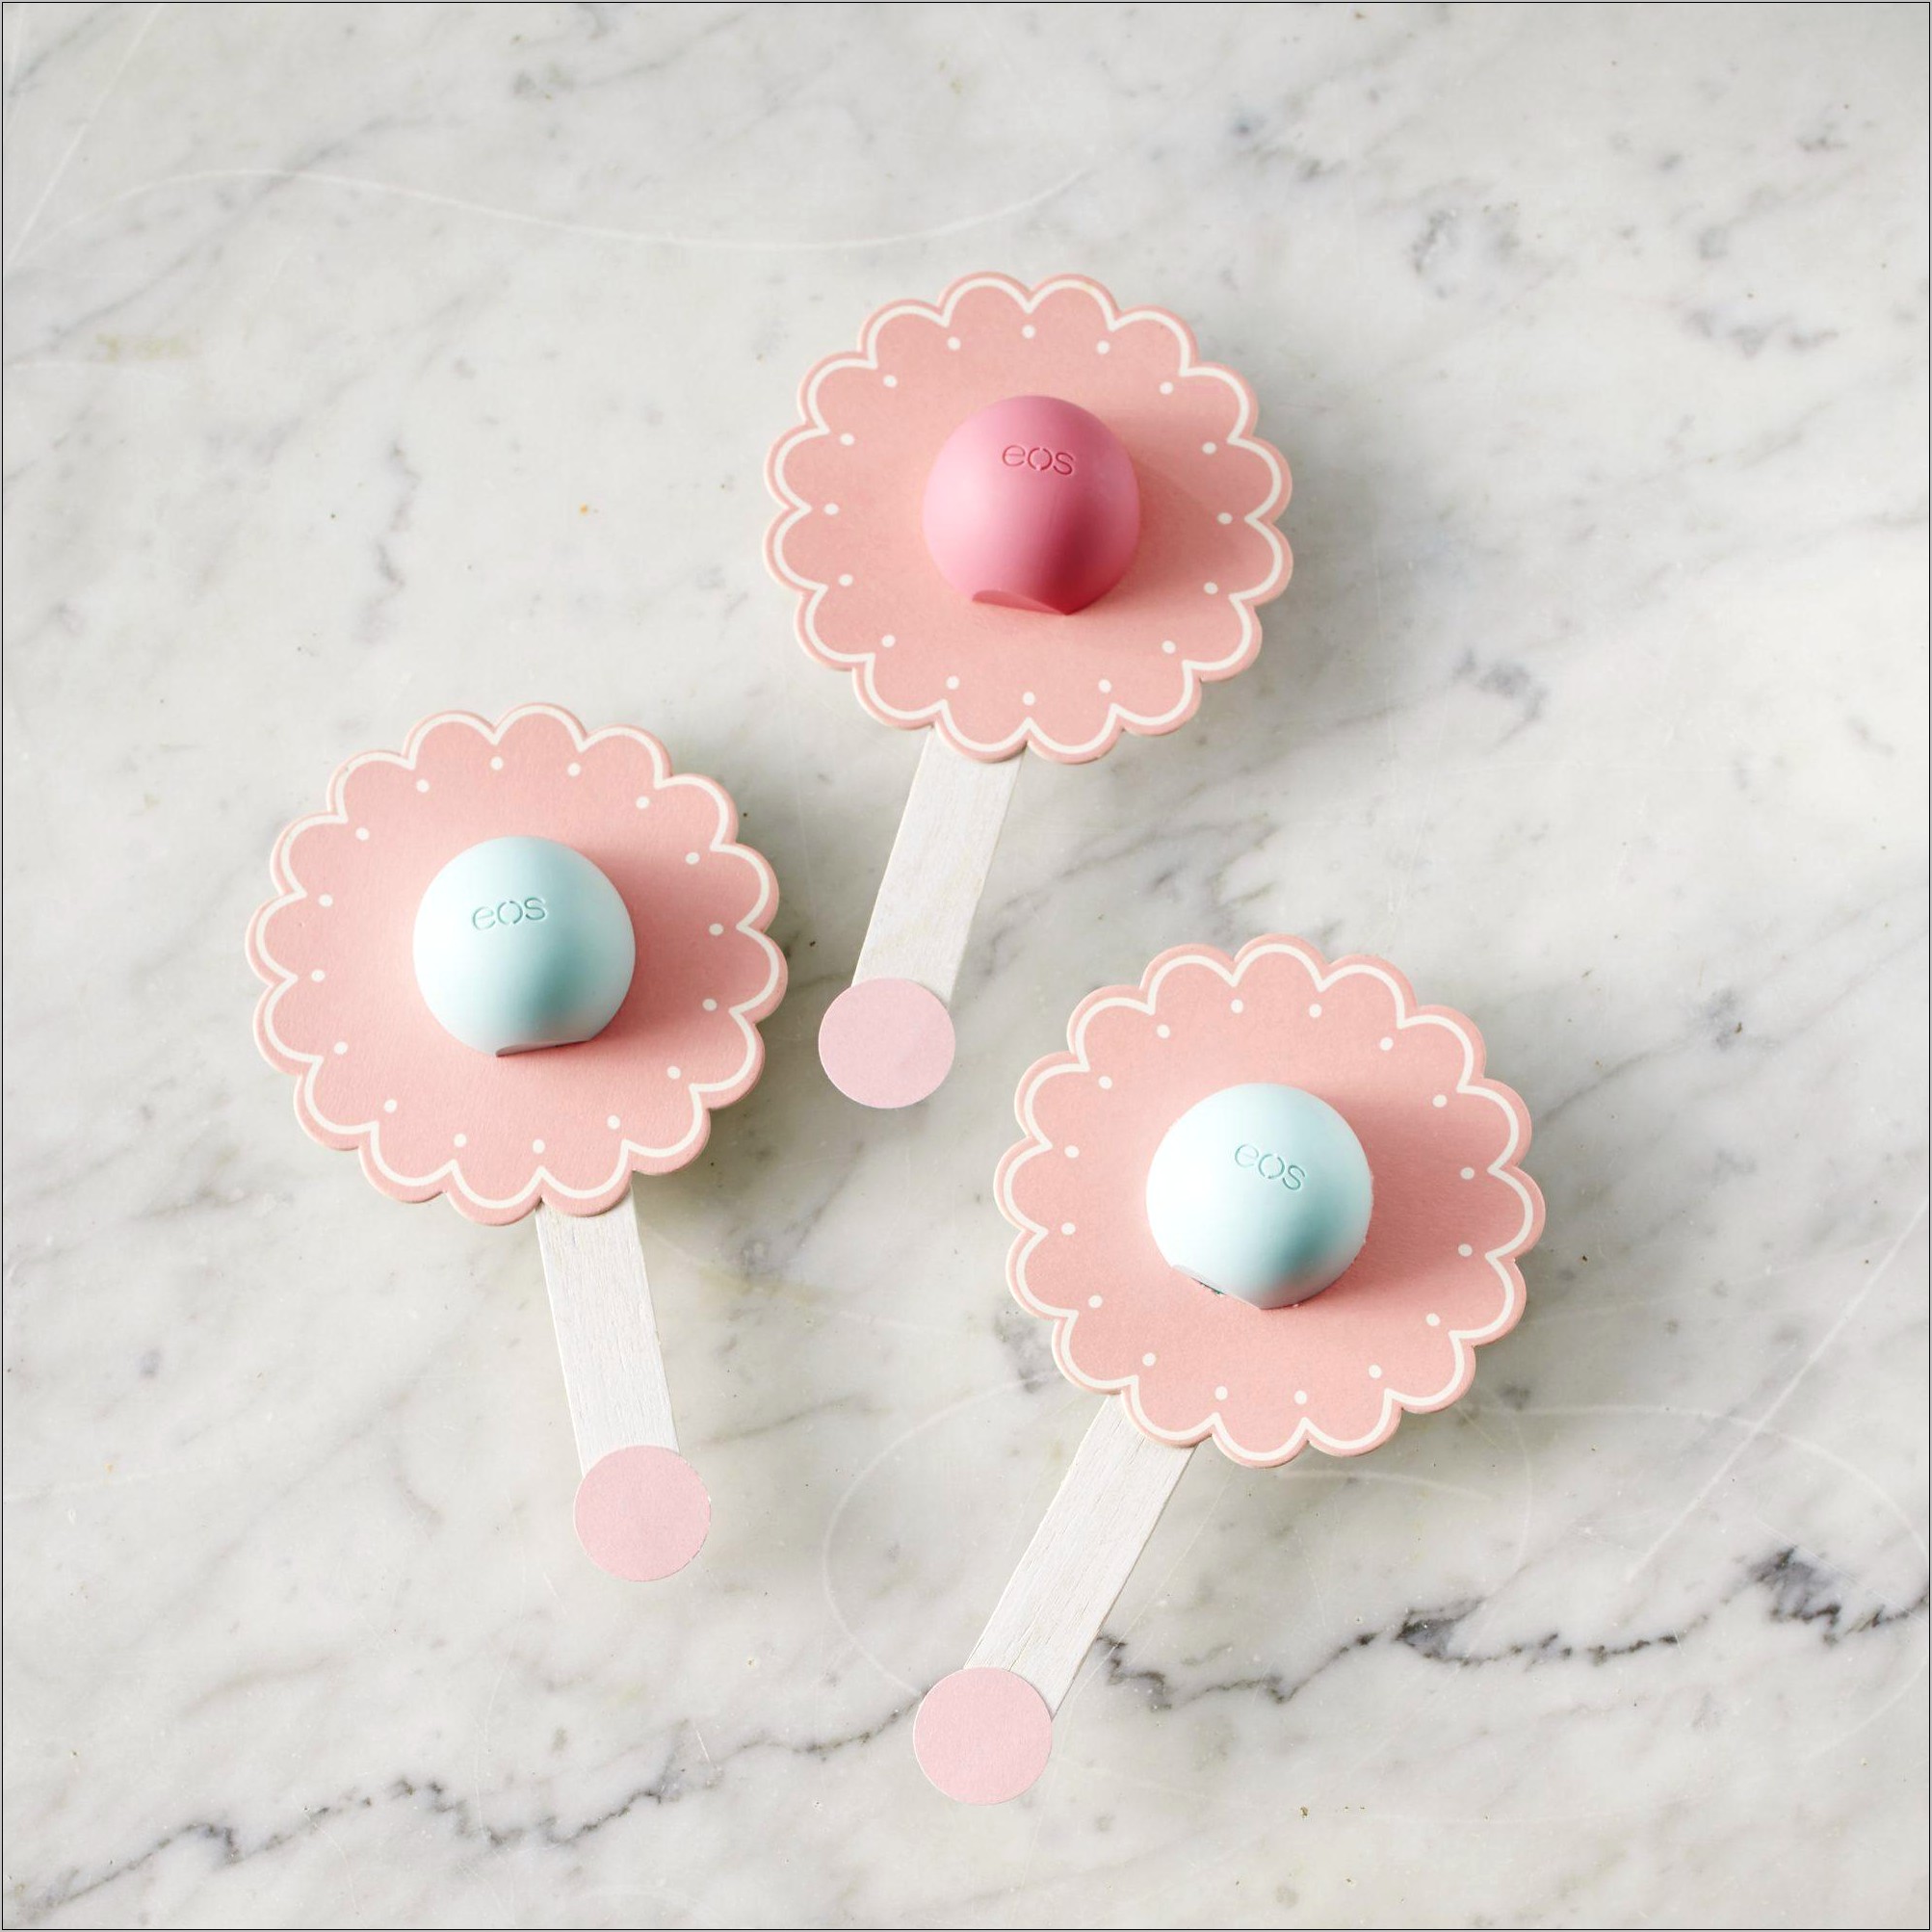 Eos Baby Shower Favor Template Free